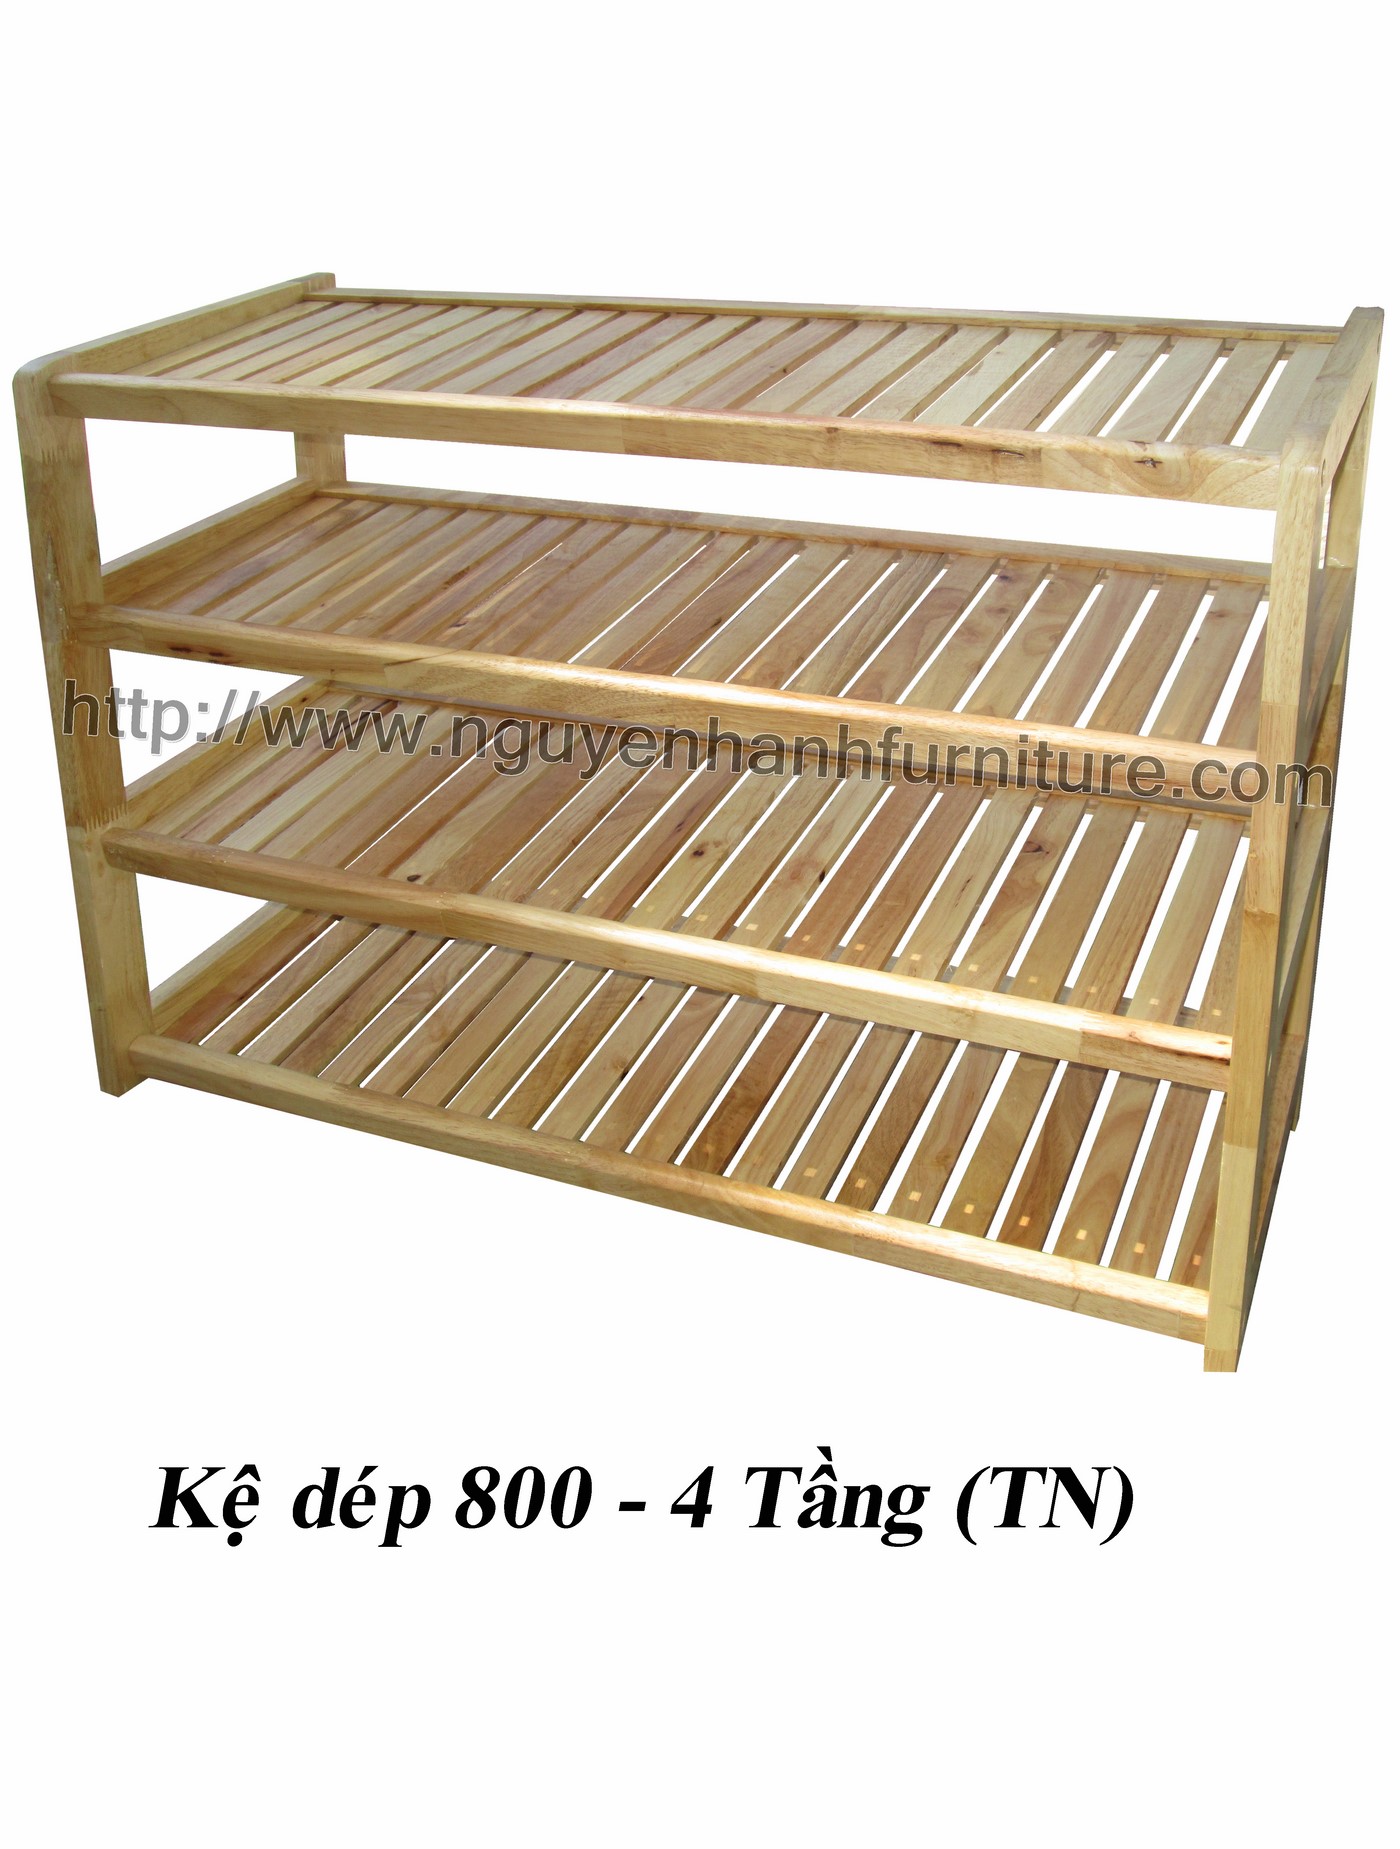 Name product: Shoeshelf 4 Floors 80 with sparse blades (Natural) - Dimensions: 80 x 30 x 62 (H) - Description: Wood natural rubber